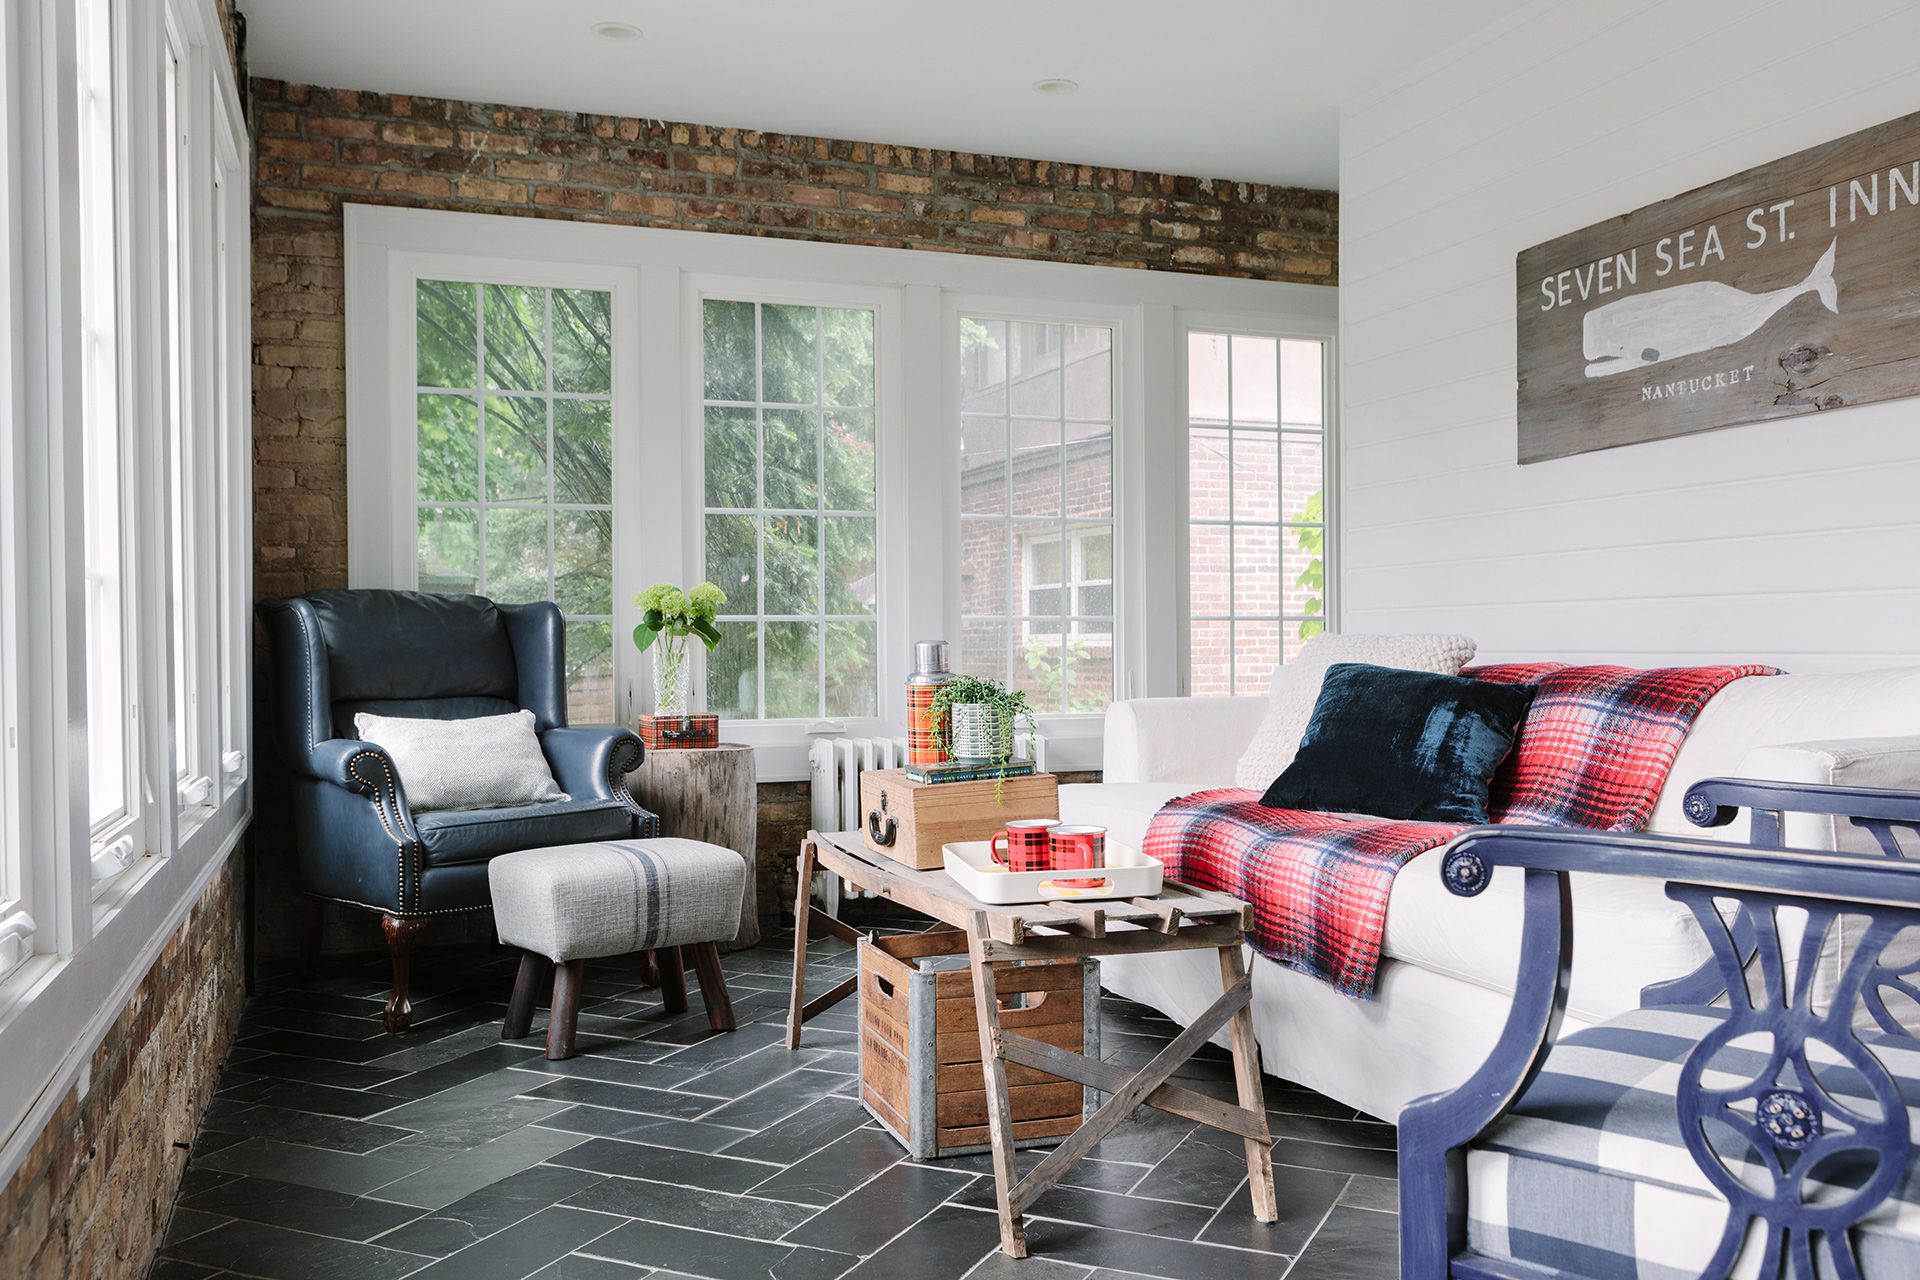 Cottage decorating ideas – 13 ways to get a charming characterful look